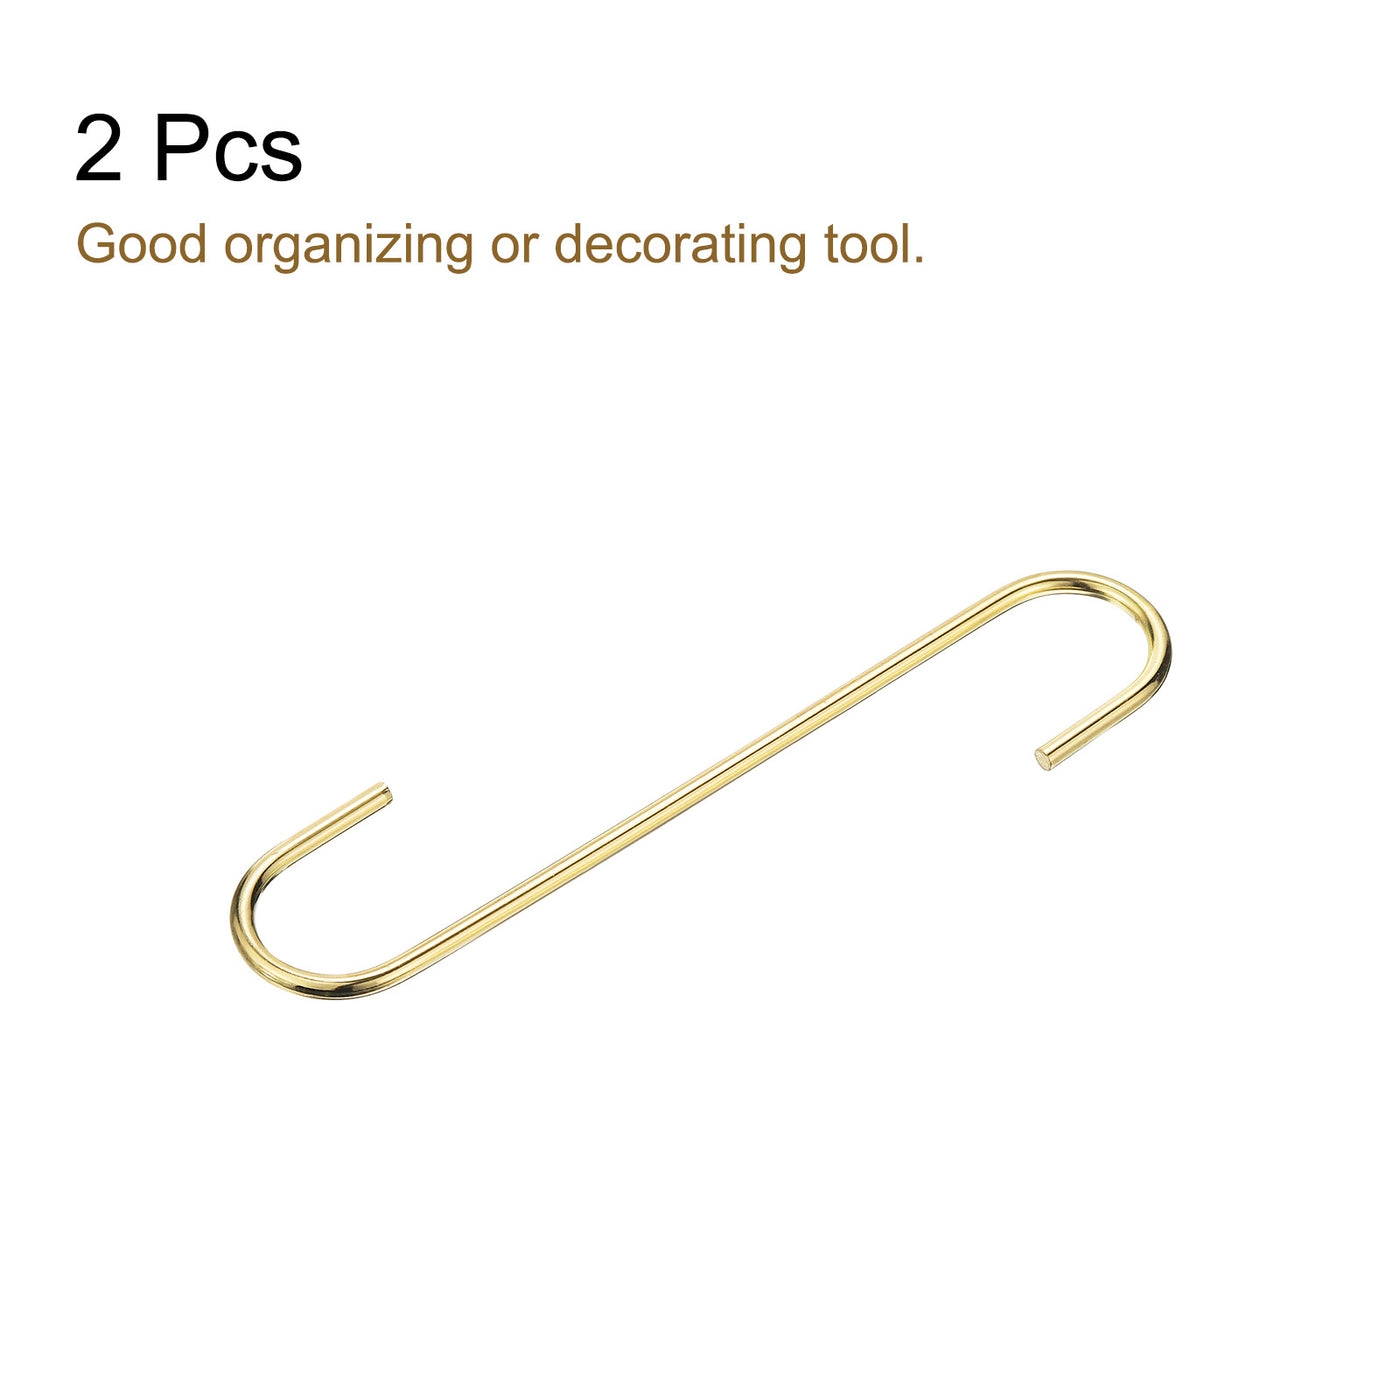 uxcell Uxcell S Hanging Hooks, 8inch(200mm) Extra Long Steel Hanger, Indoor Outdoor Uses for Garden, Bathroom, Closet, Workshop, Kitchen, Gold Tone, 2Pcs